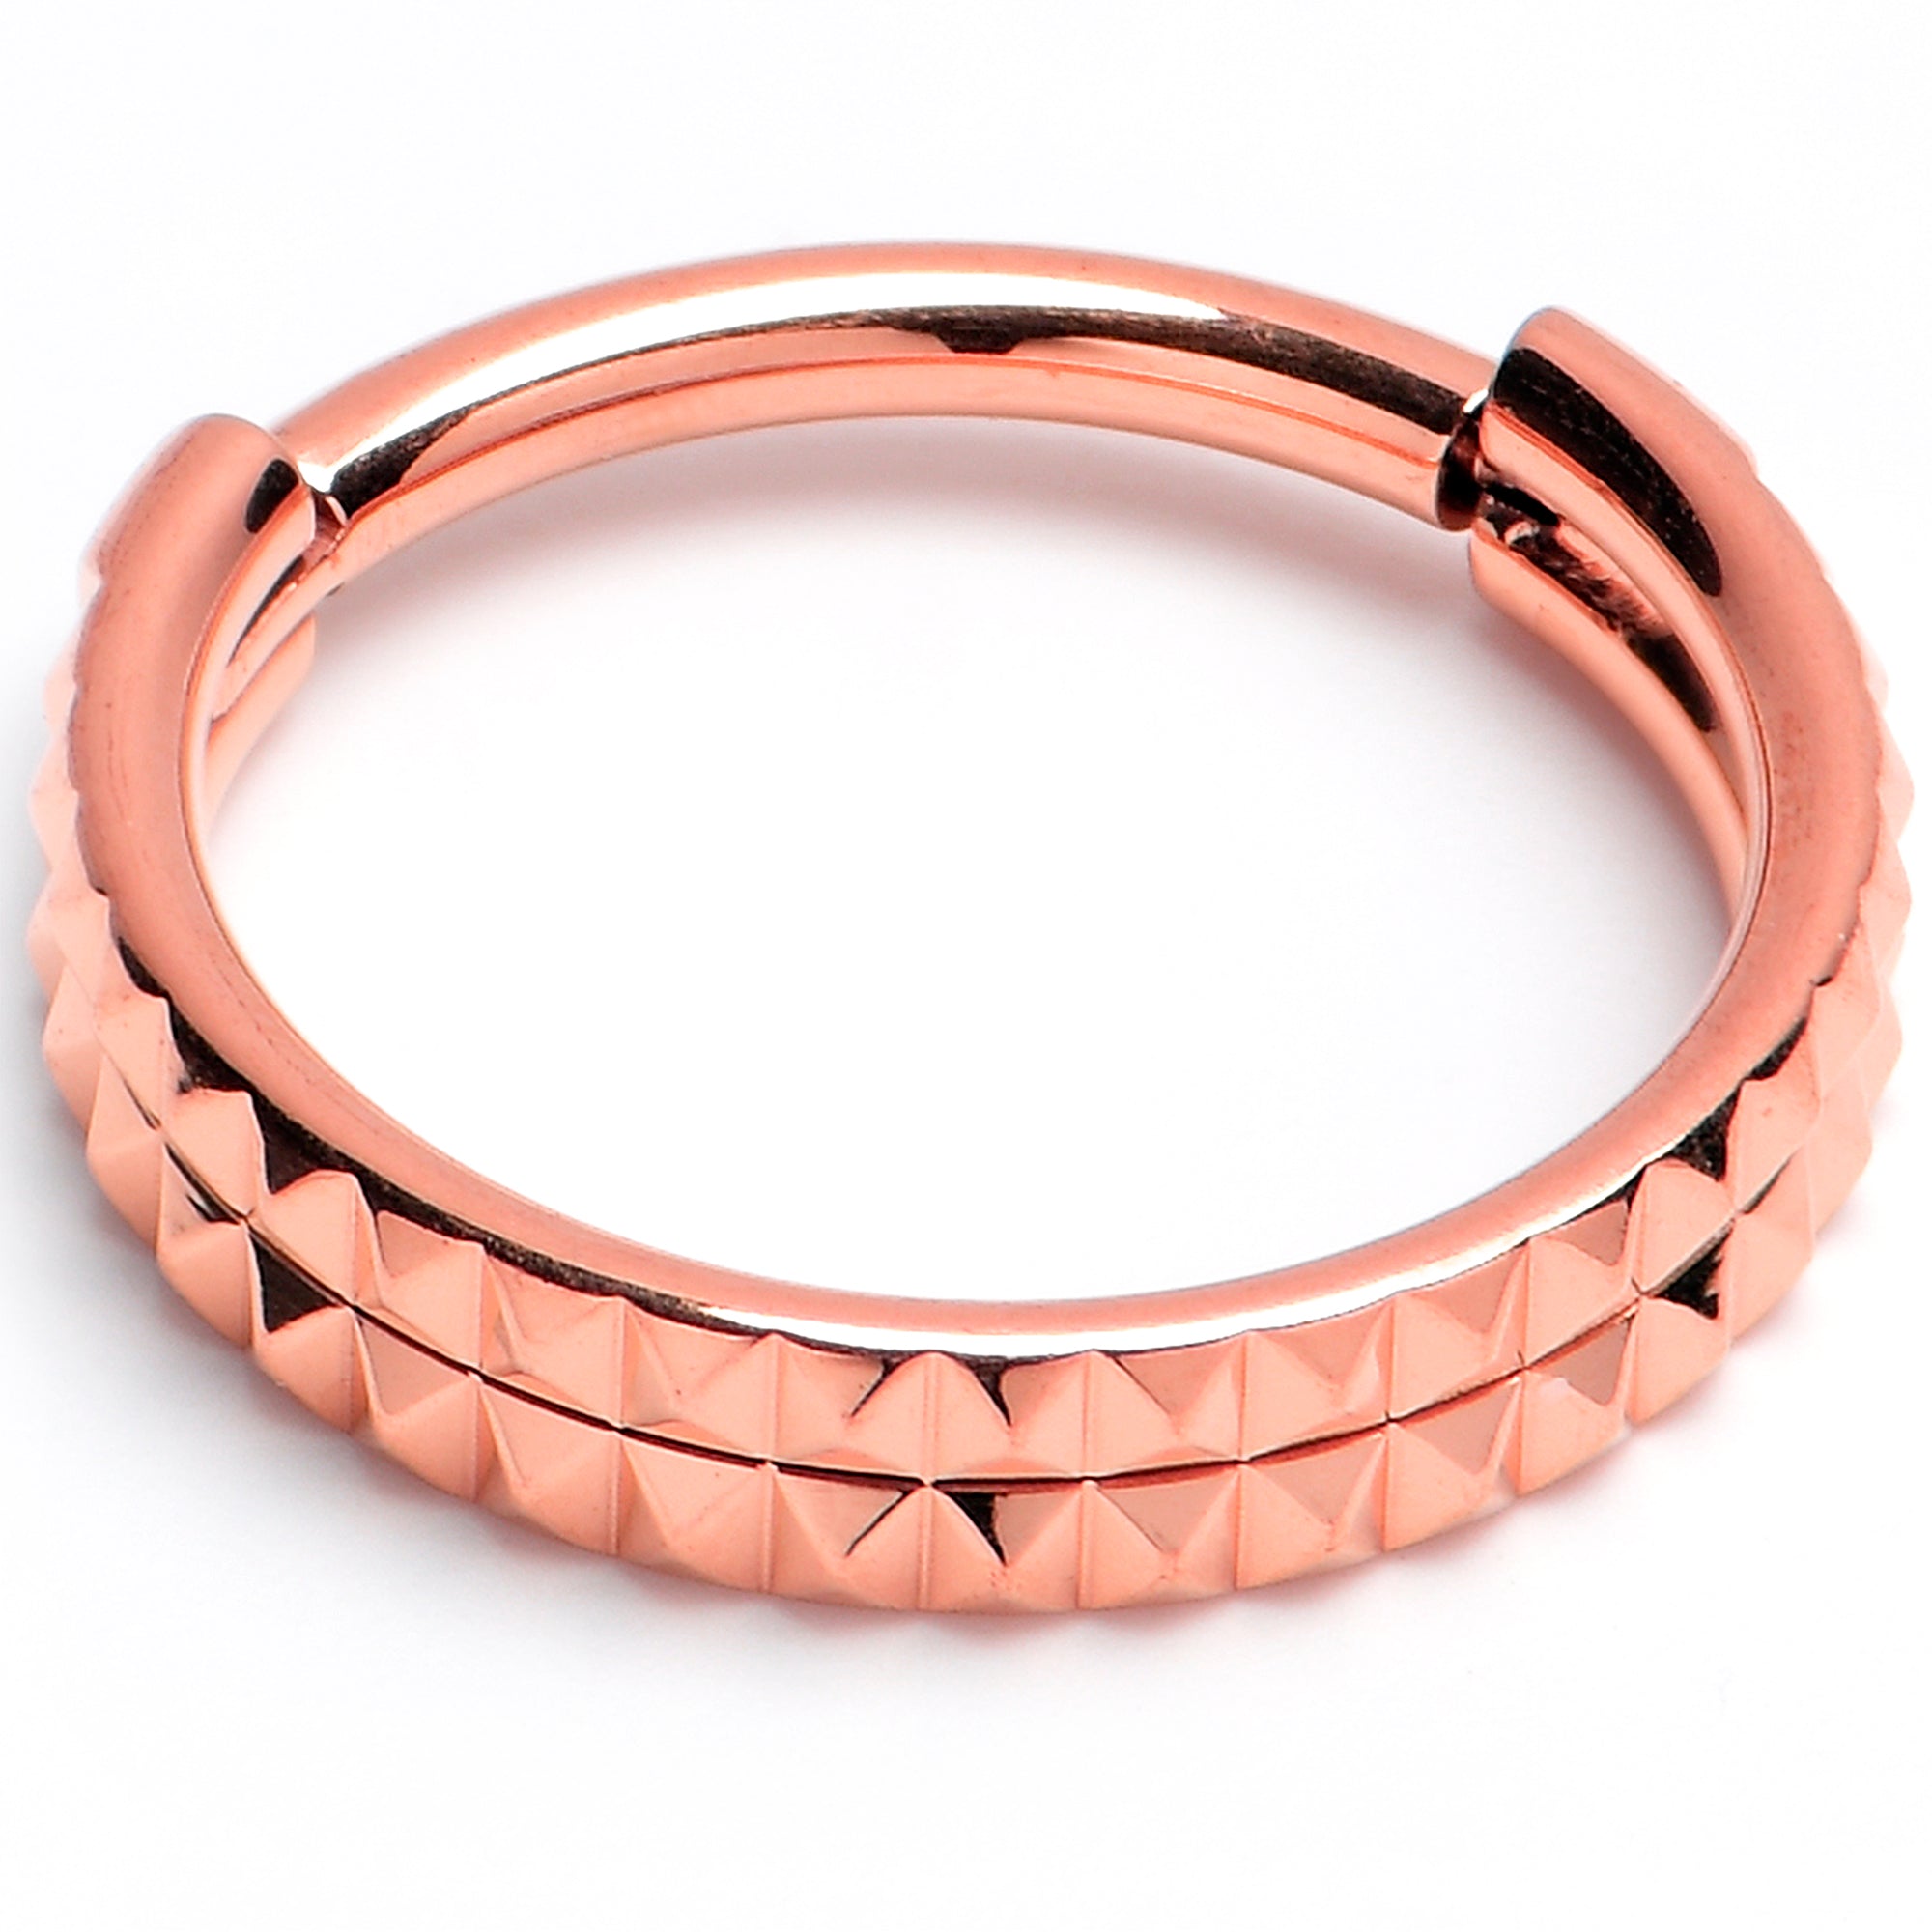 16 Gauge 3/8 Rose Gold PVD Pyramid Cut Double Hoop 316L Surgical Steel Hinged Segment Ring